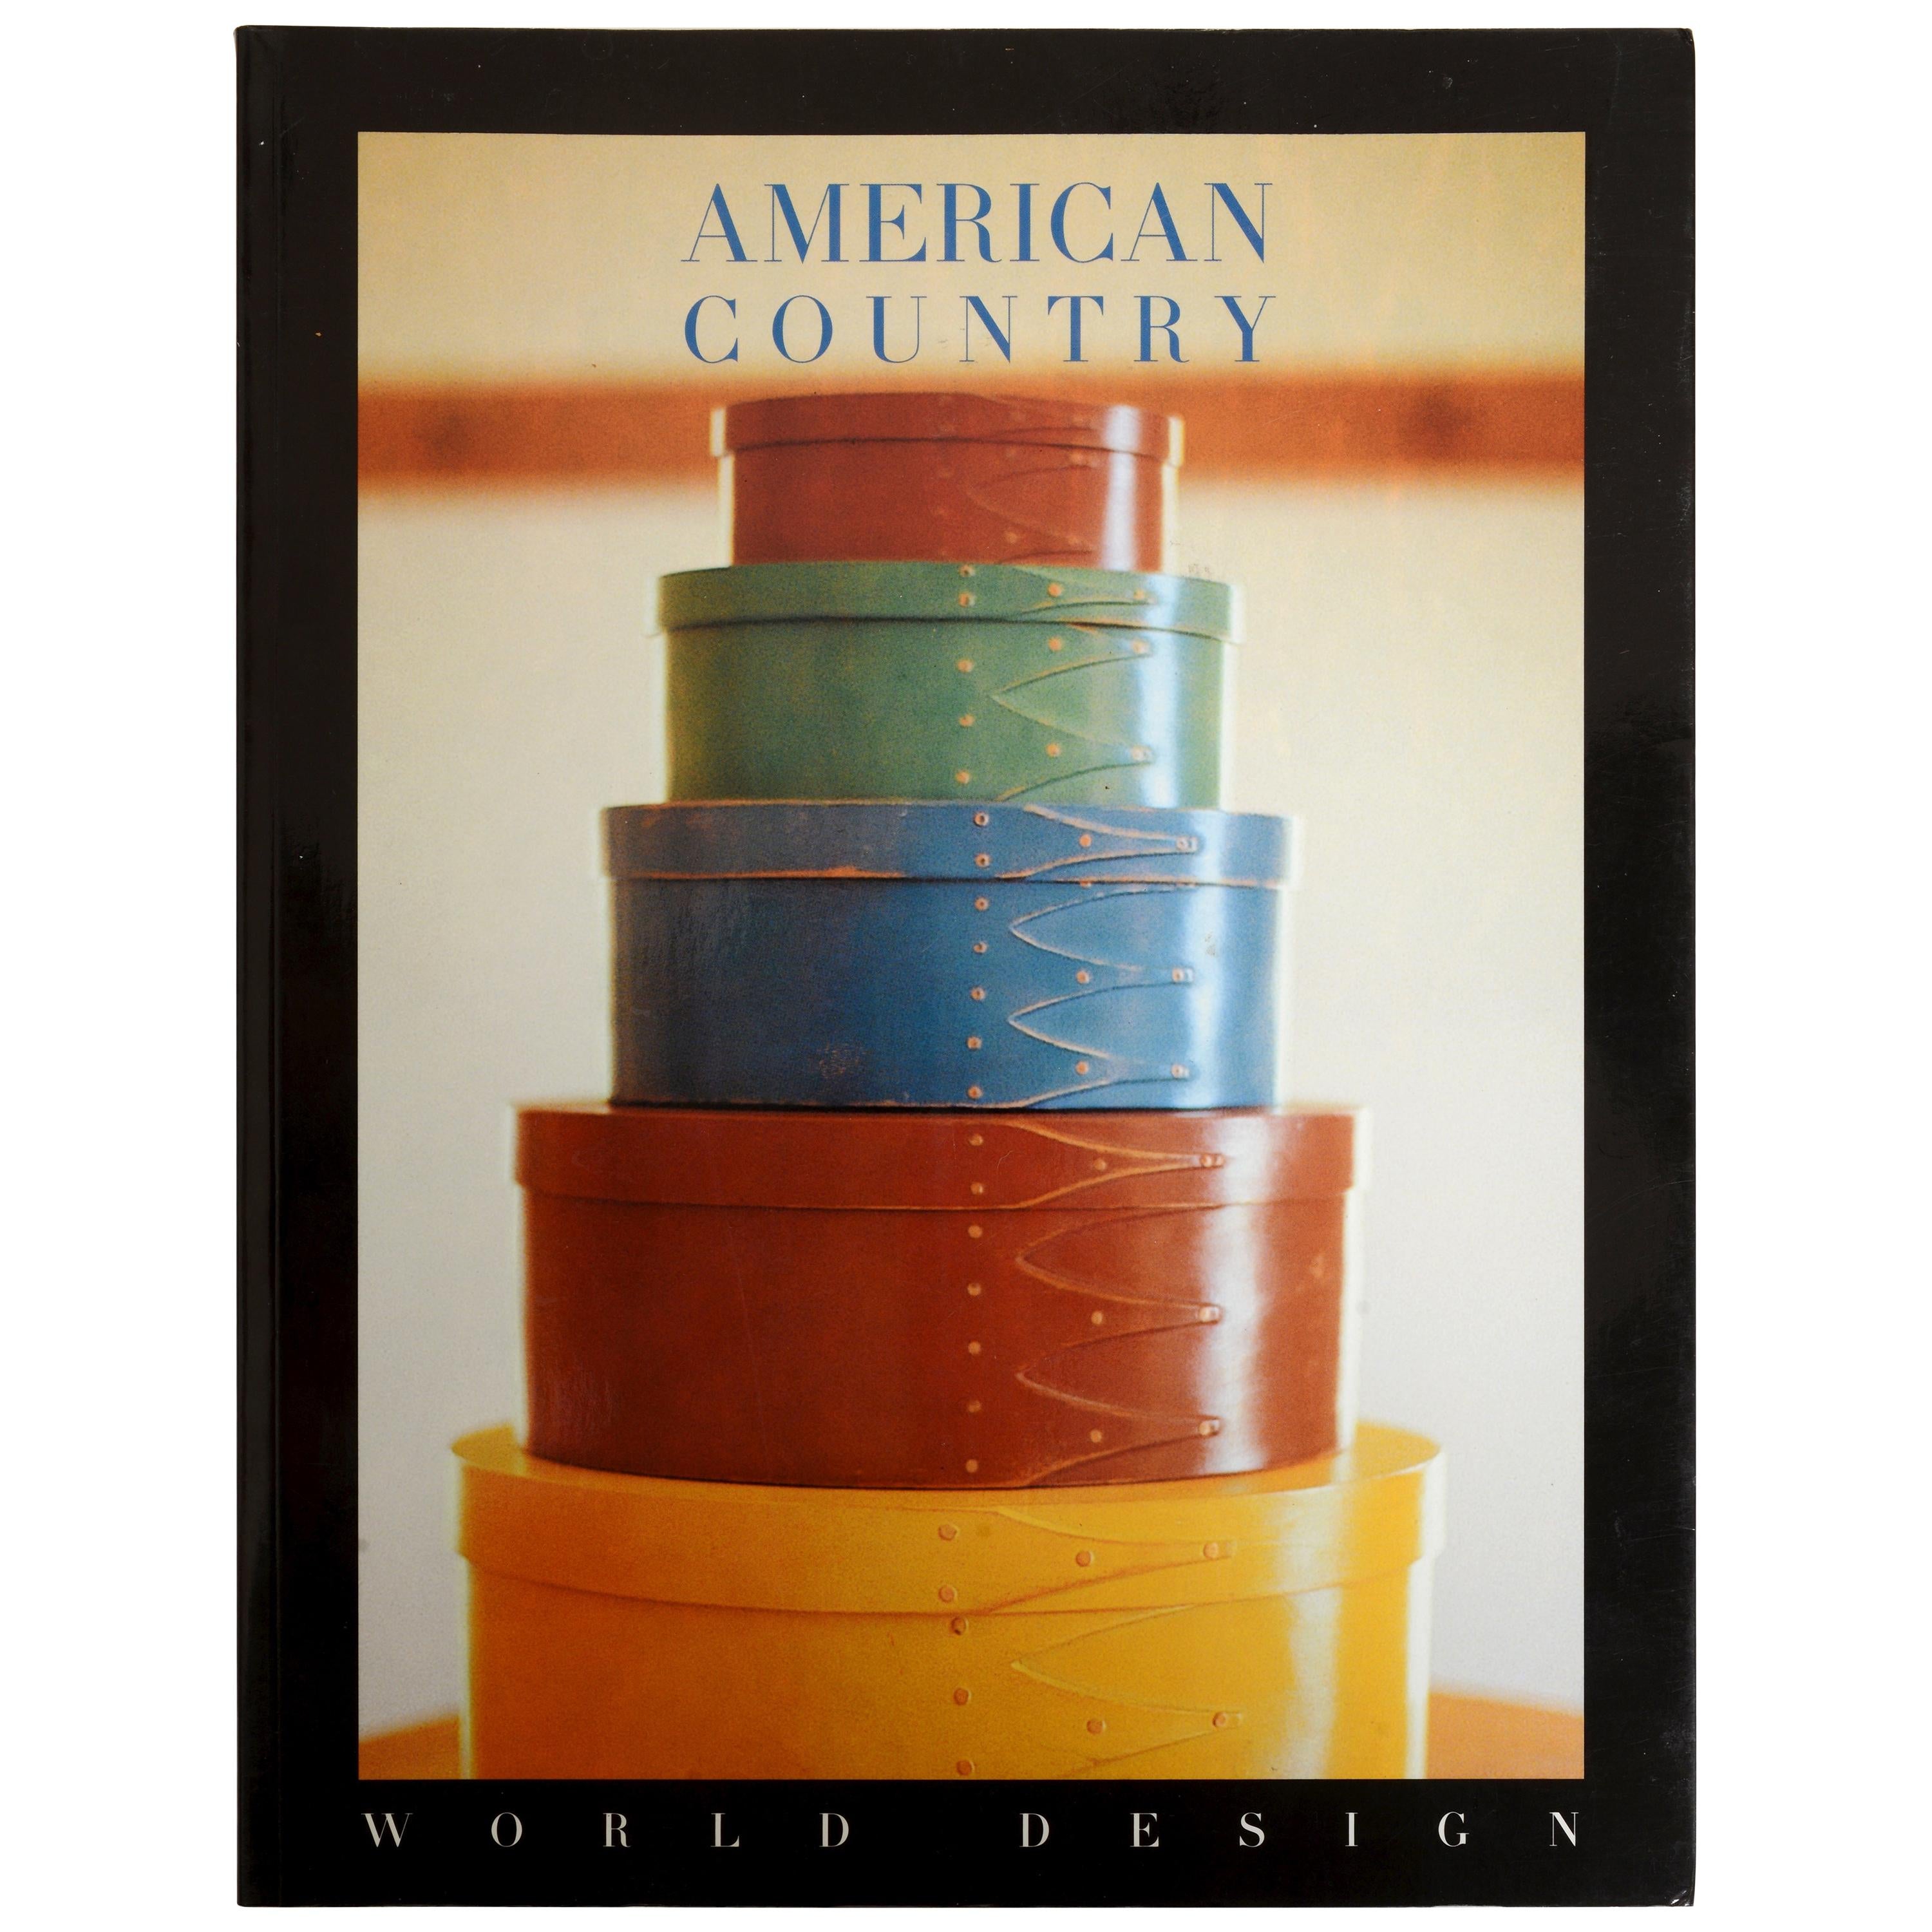 American Country World Design Series, First Edition